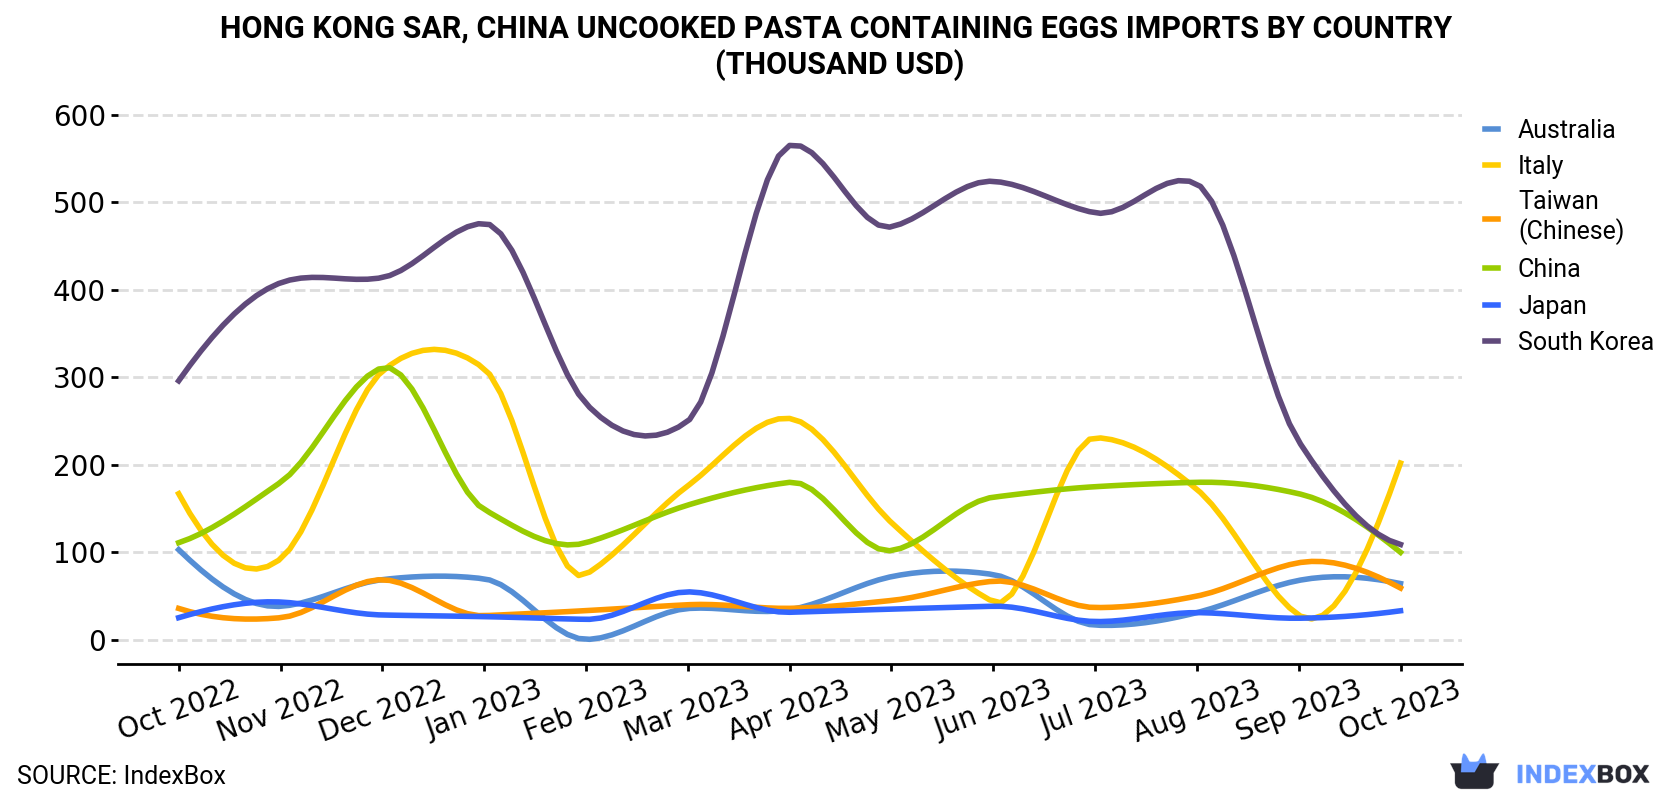 Hong Kong Uncooked Pasta Containing Eggs Imports By Country (Thousand USD)